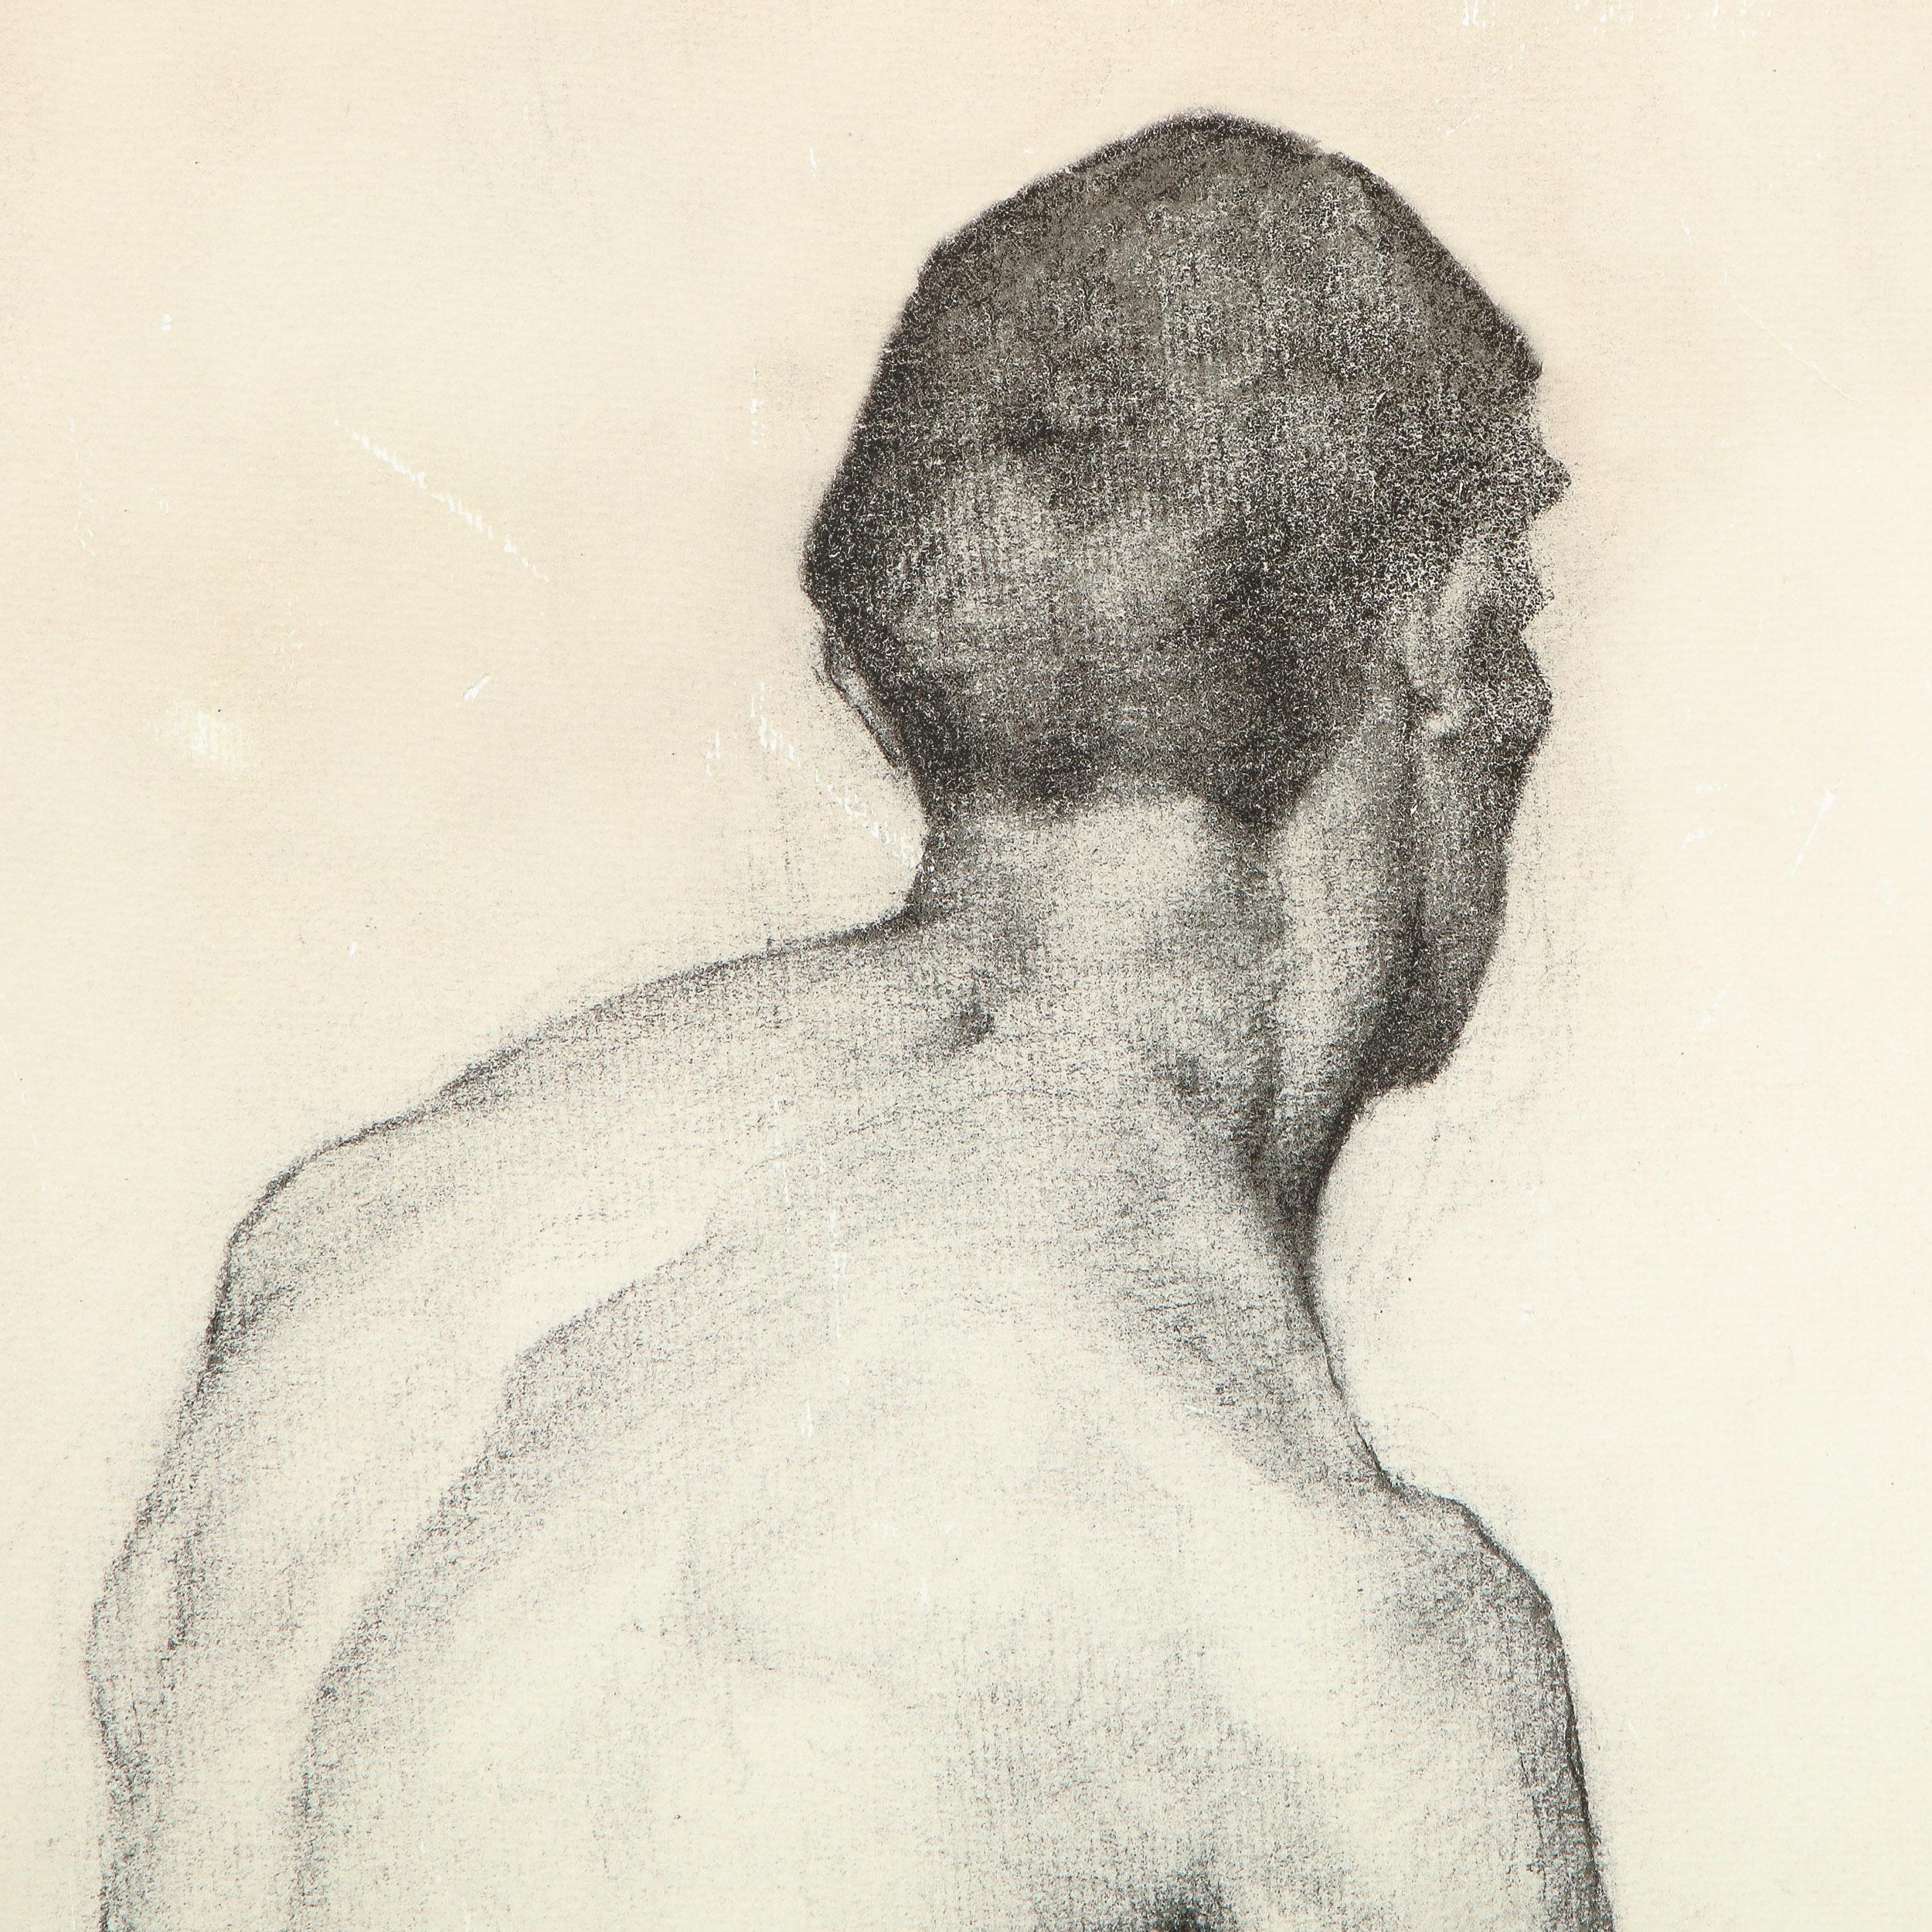 Realized in the manner of Thomas Eakins, this sophisticated figurative print presents a nude male model with his back to the viewer. Showcasing both the technical faculty of the artist and the beautiful natural musculature of the model, this piece